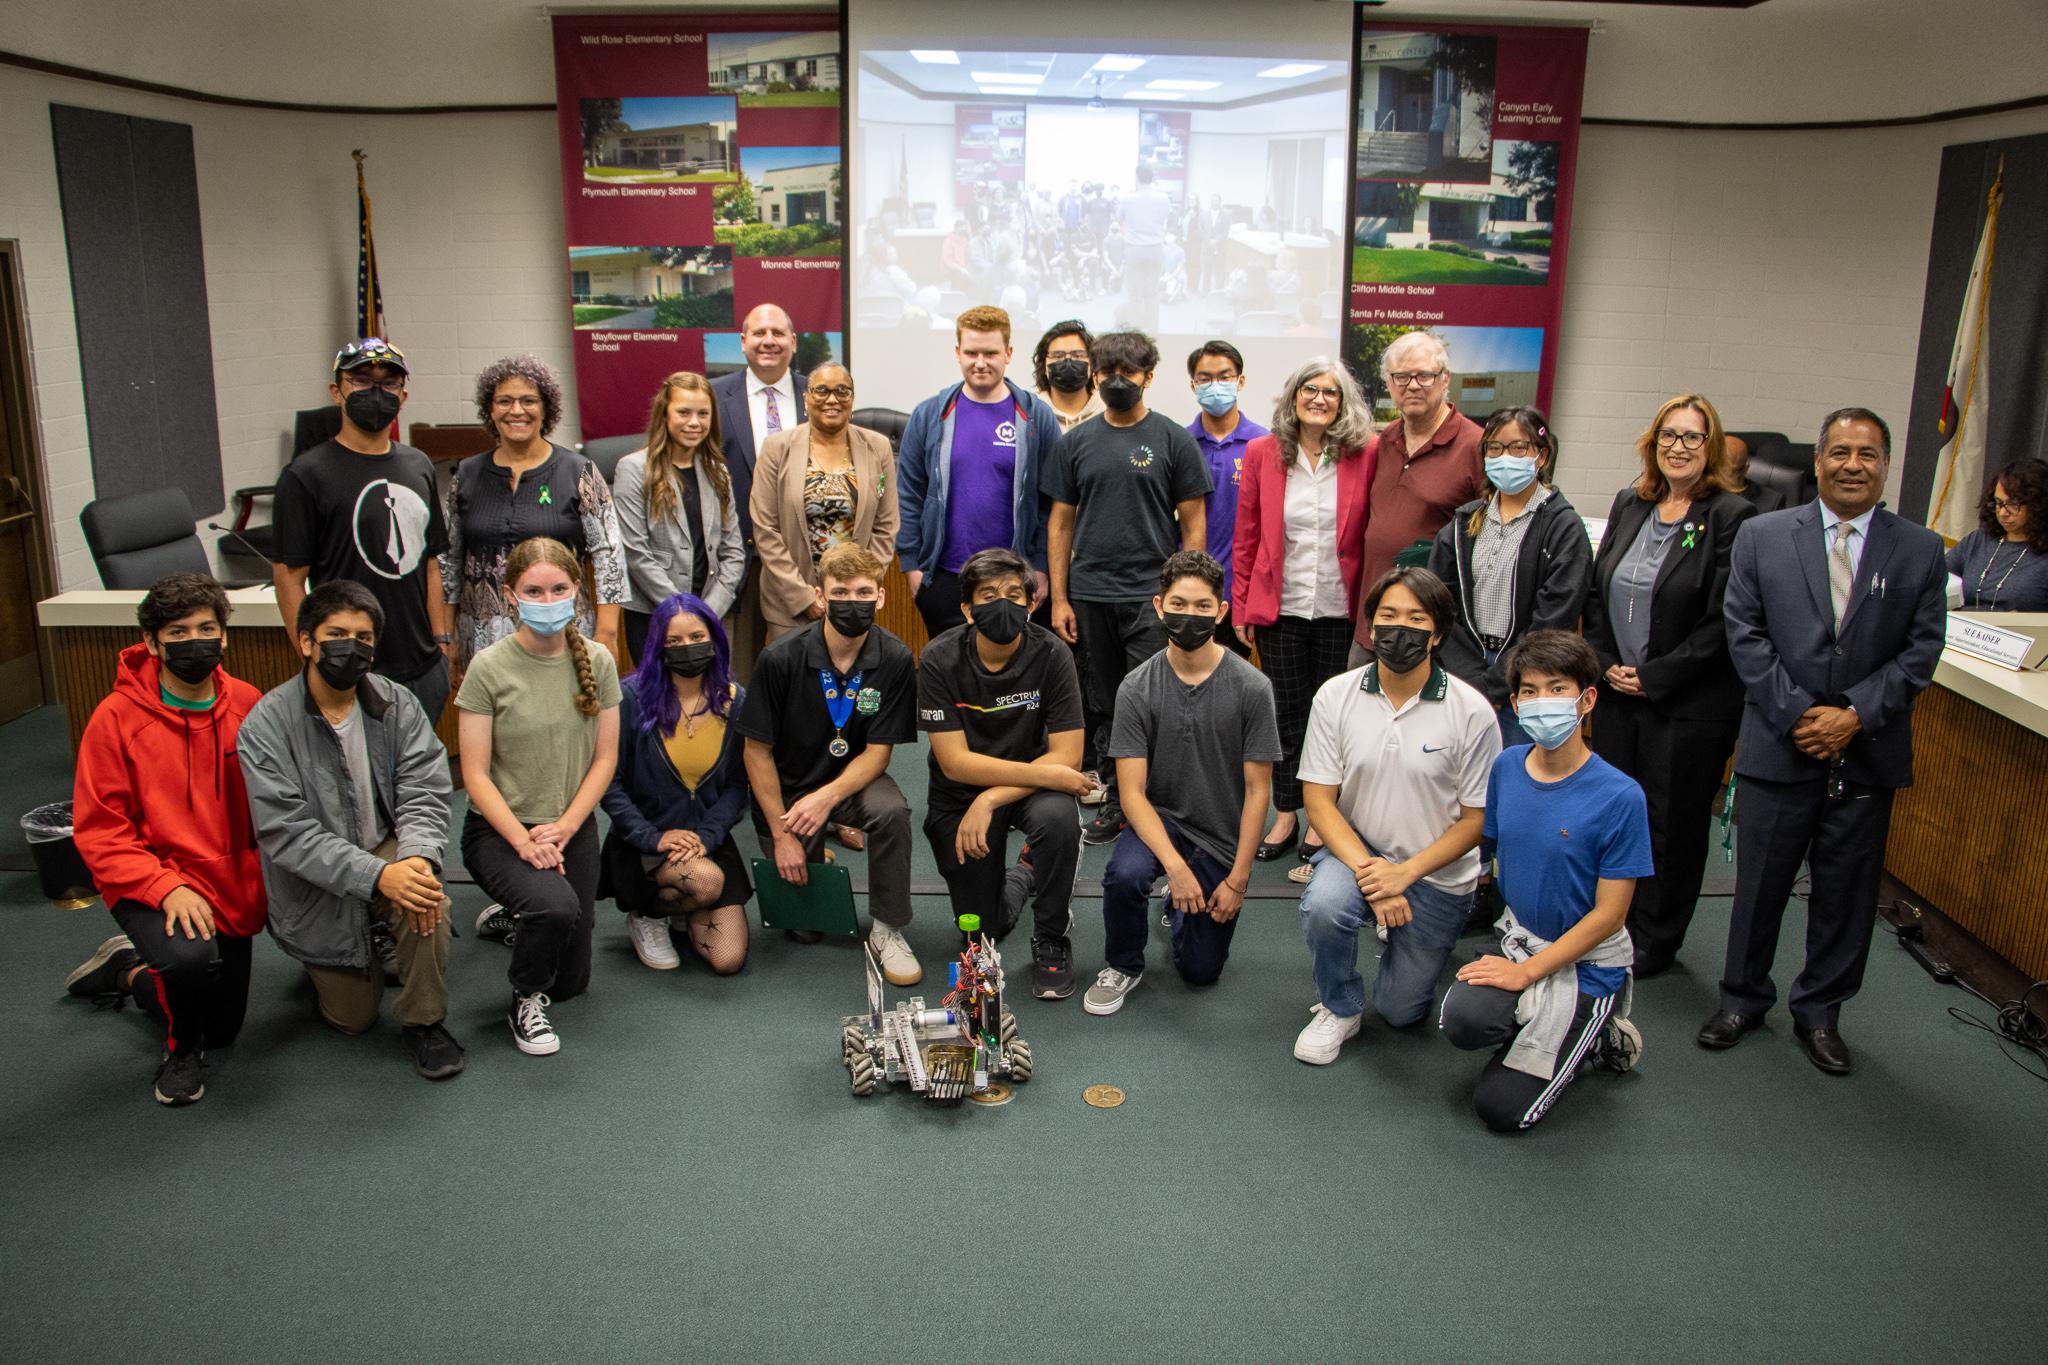 The Board invited robotics teams from Clifton Middle School (first picture), Santa Fe Computer Science Magnet School (second picture), and Monrovia High School (third picture).